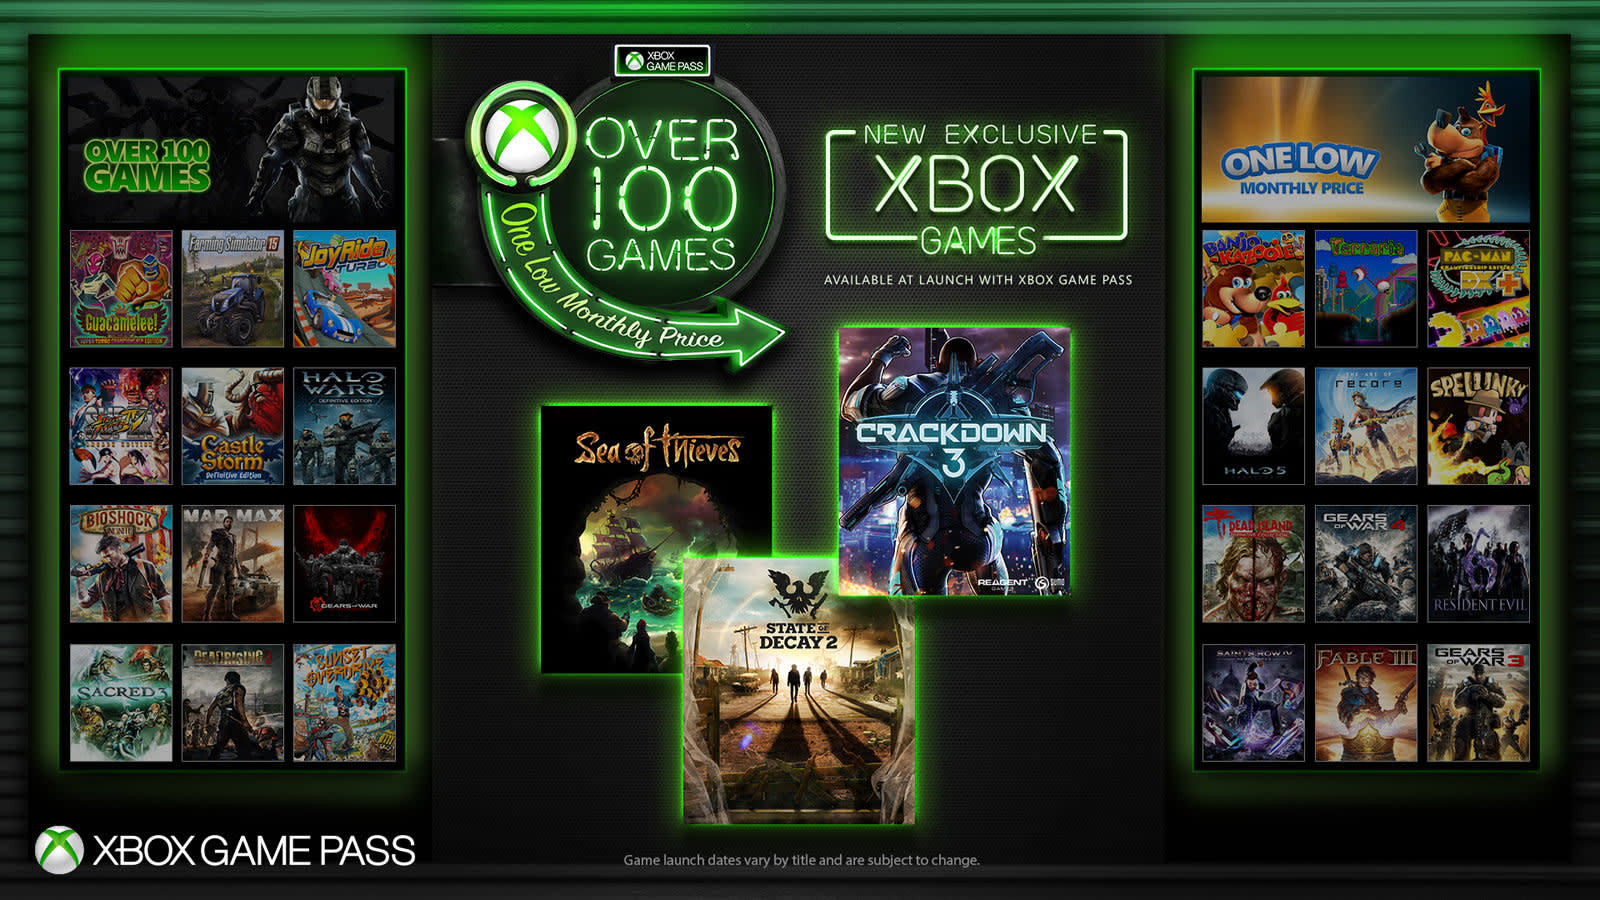 Xbox Game Pass Ultimate combines Gold and games for $15 a month | Engadget